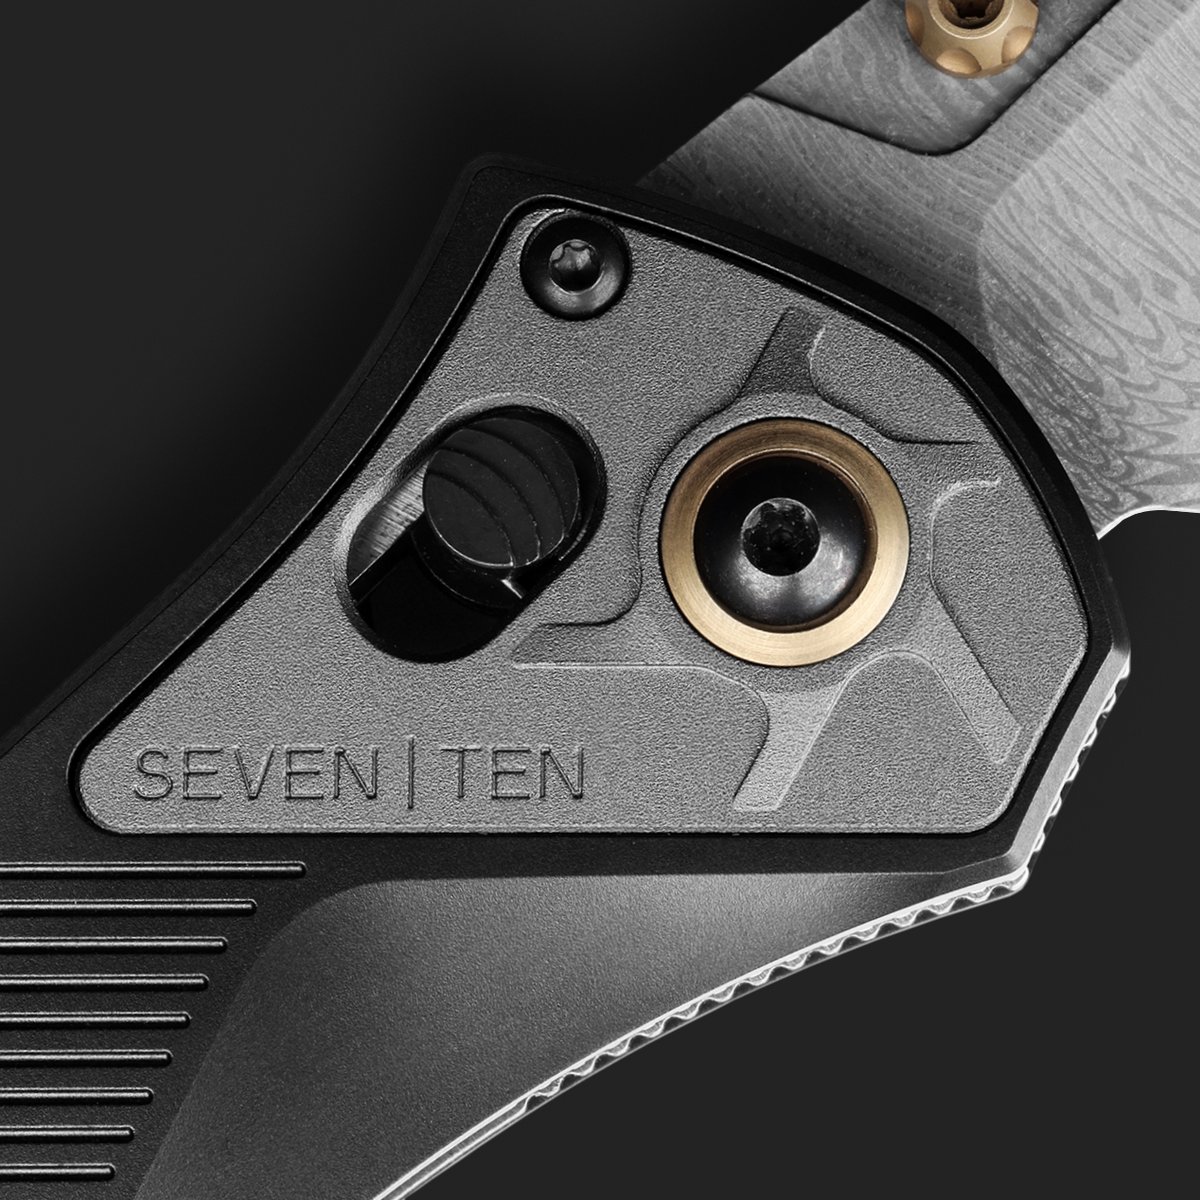 T-minus 1 hour! Today at 9 a.m. PST, we're launching the Gold Class SEVEN | TEN™. Only 250 of these are available worldwide, so be ready to snag yours as fast as you can. bit.ly/49rGZxe